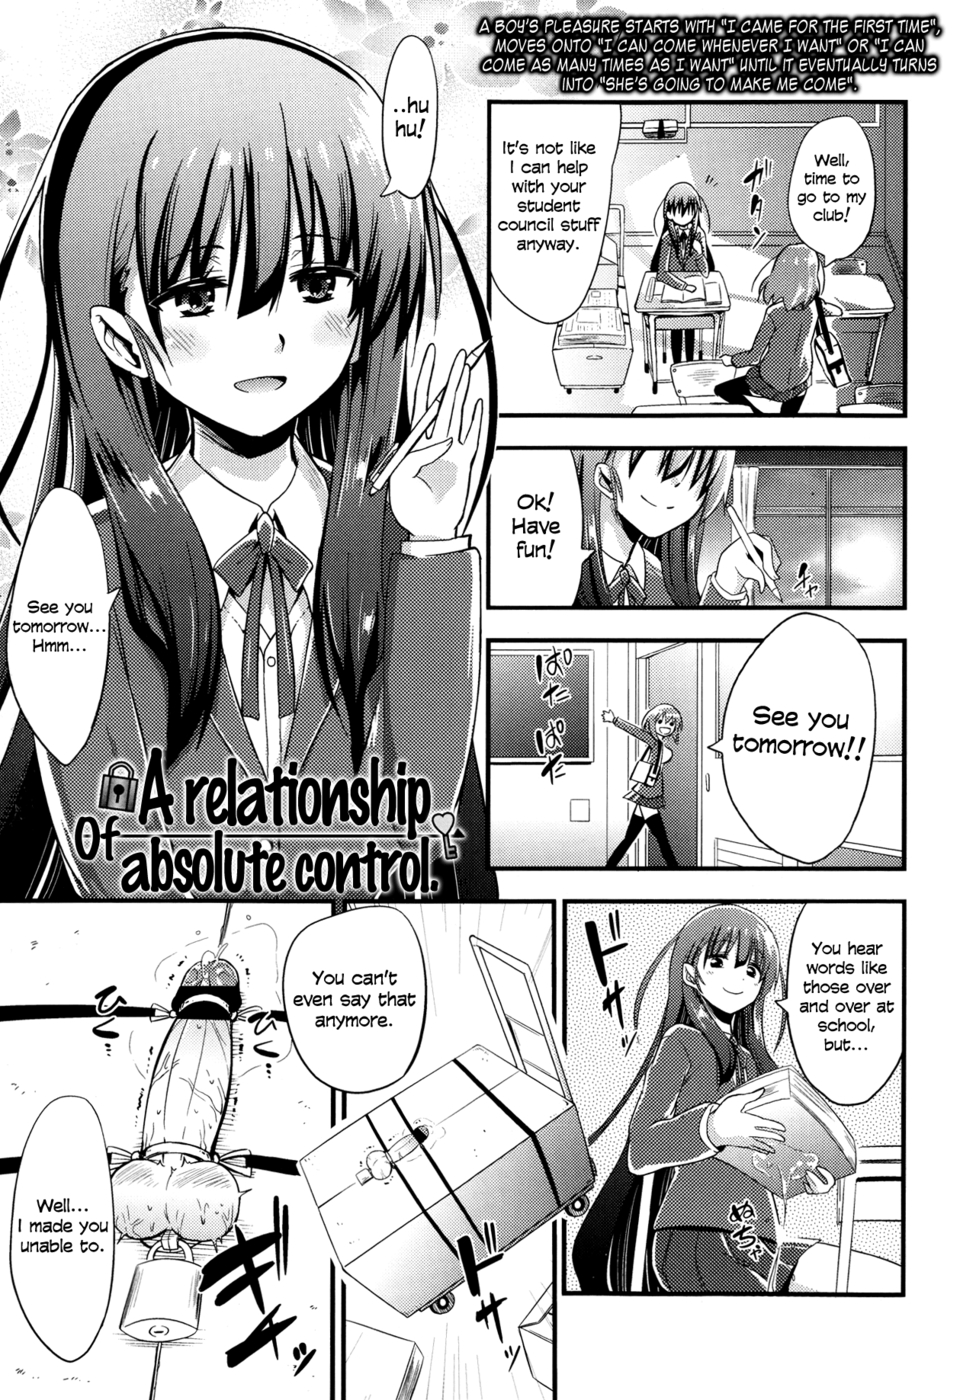 Hentai Manga Comic-A Relationship of Absolute Control-Read-1